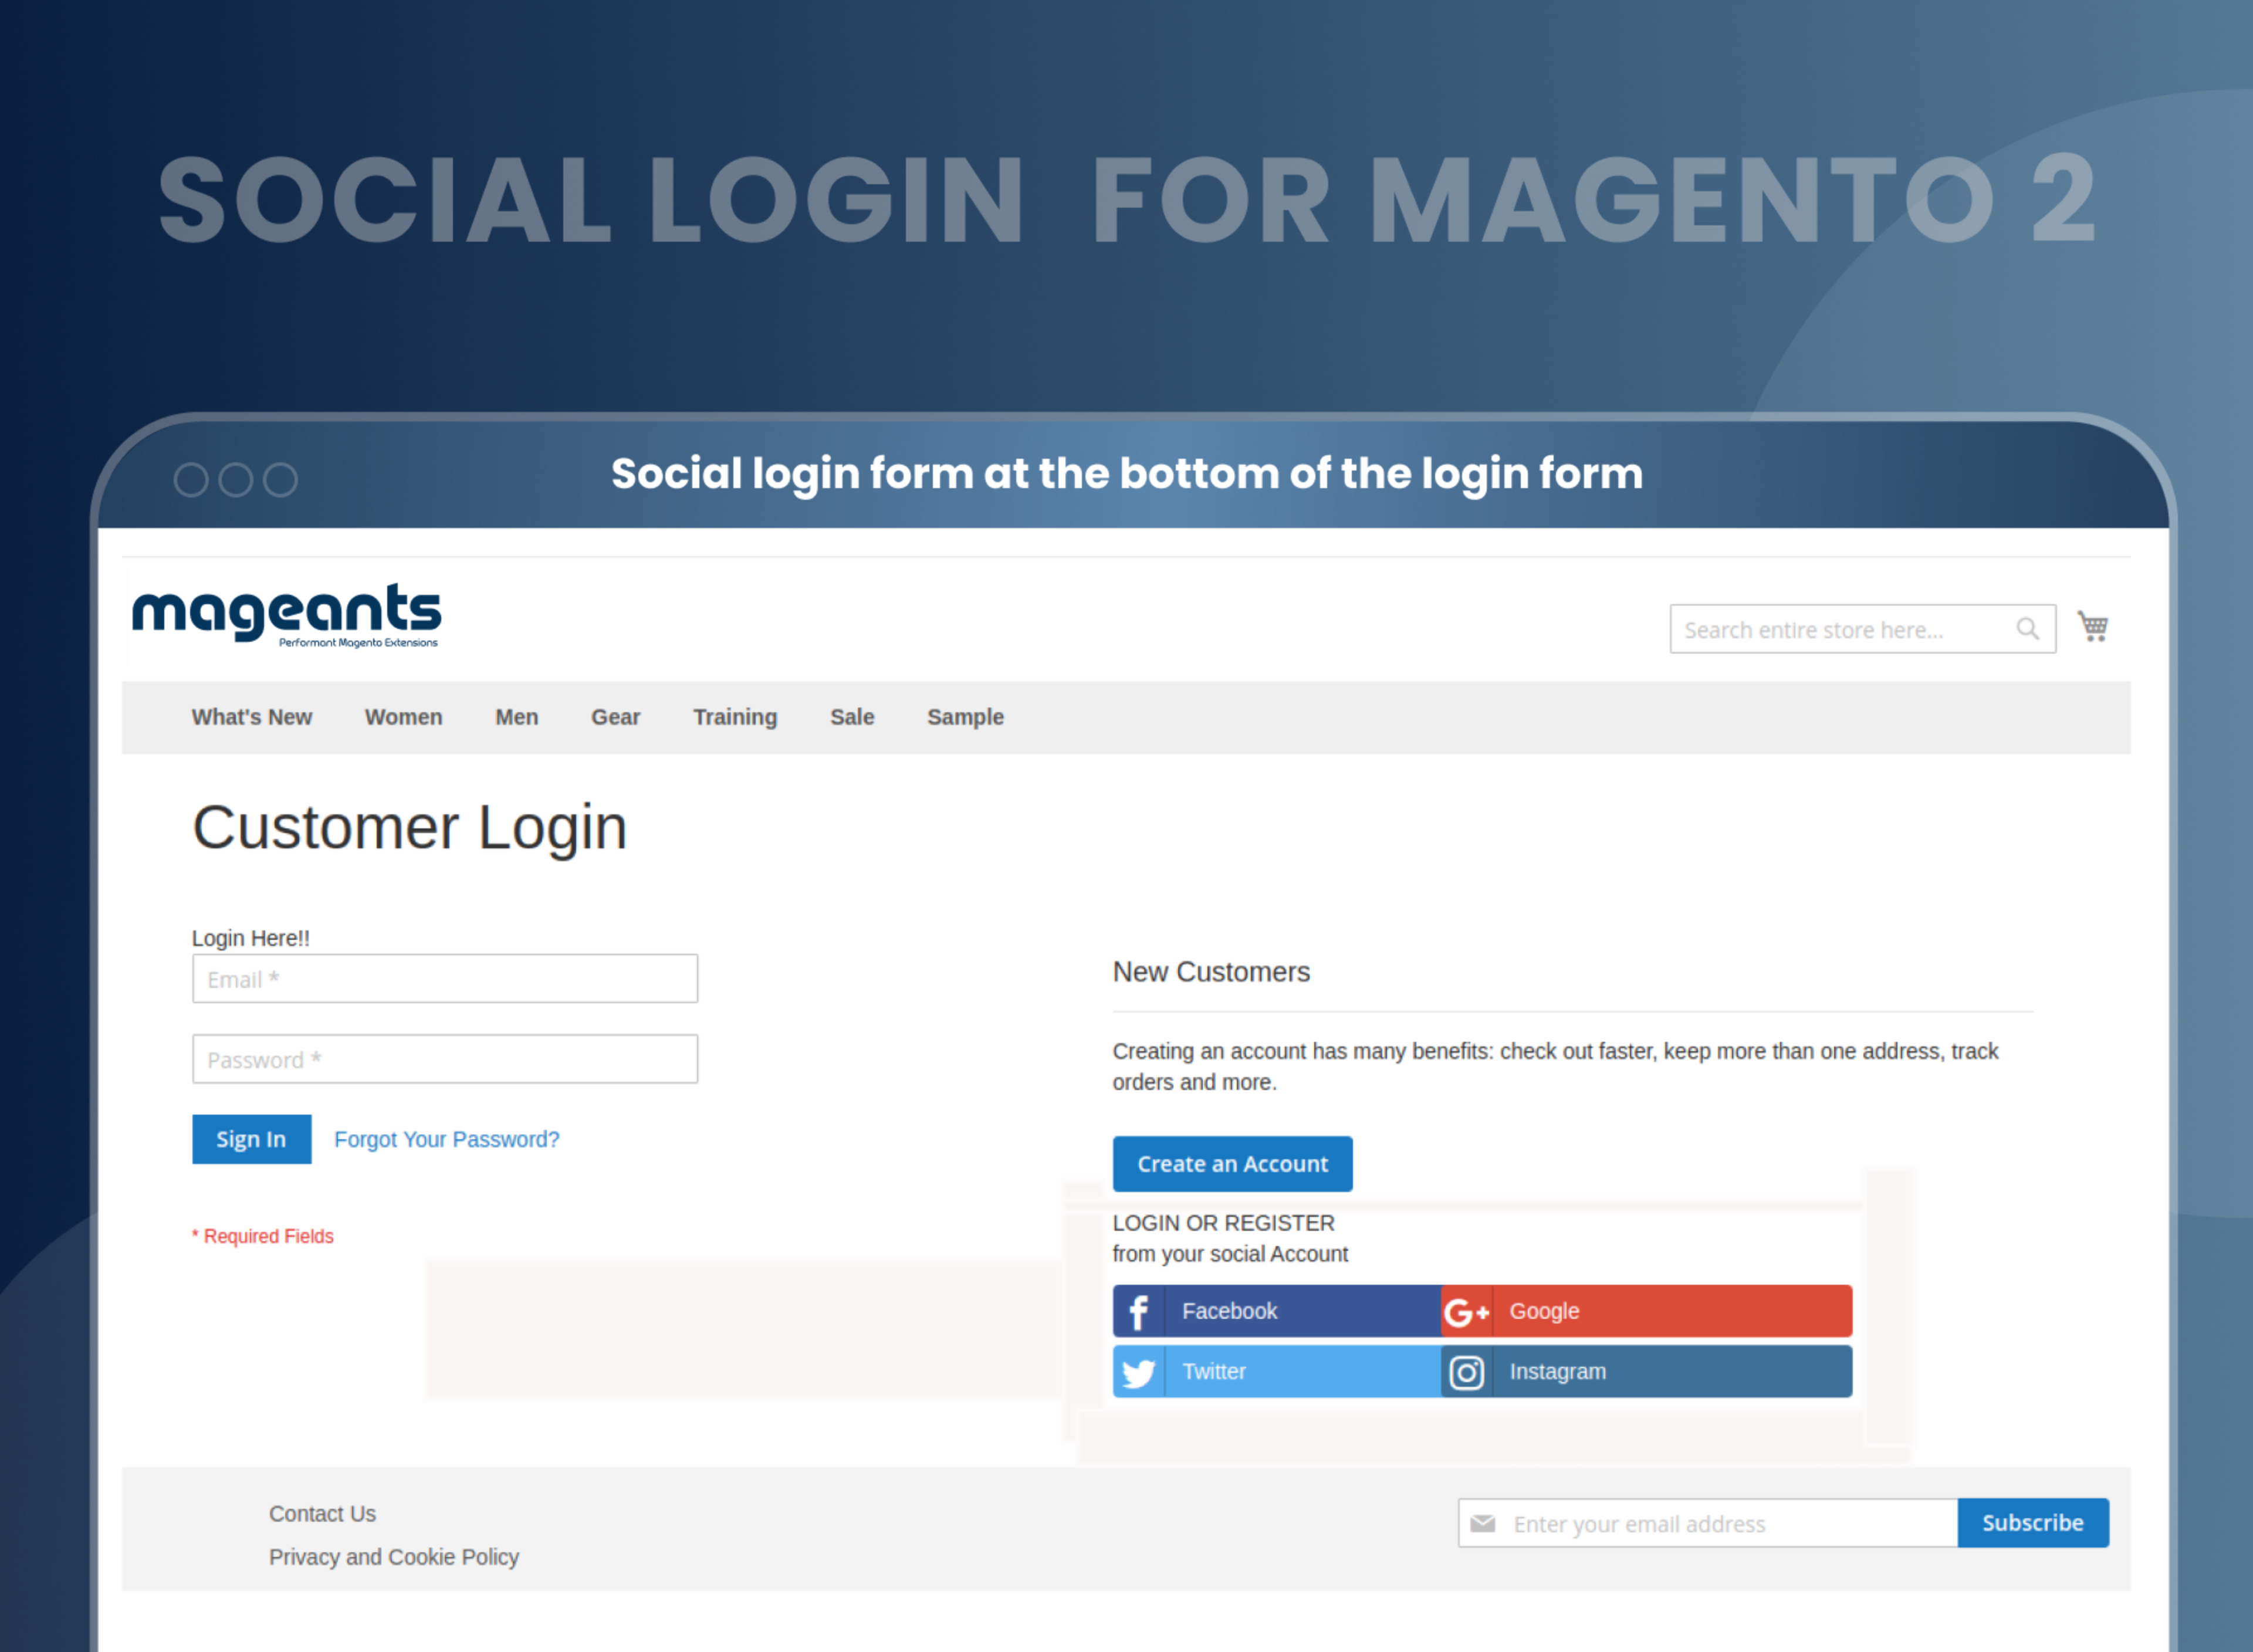 Social login form at the bottom of the login form